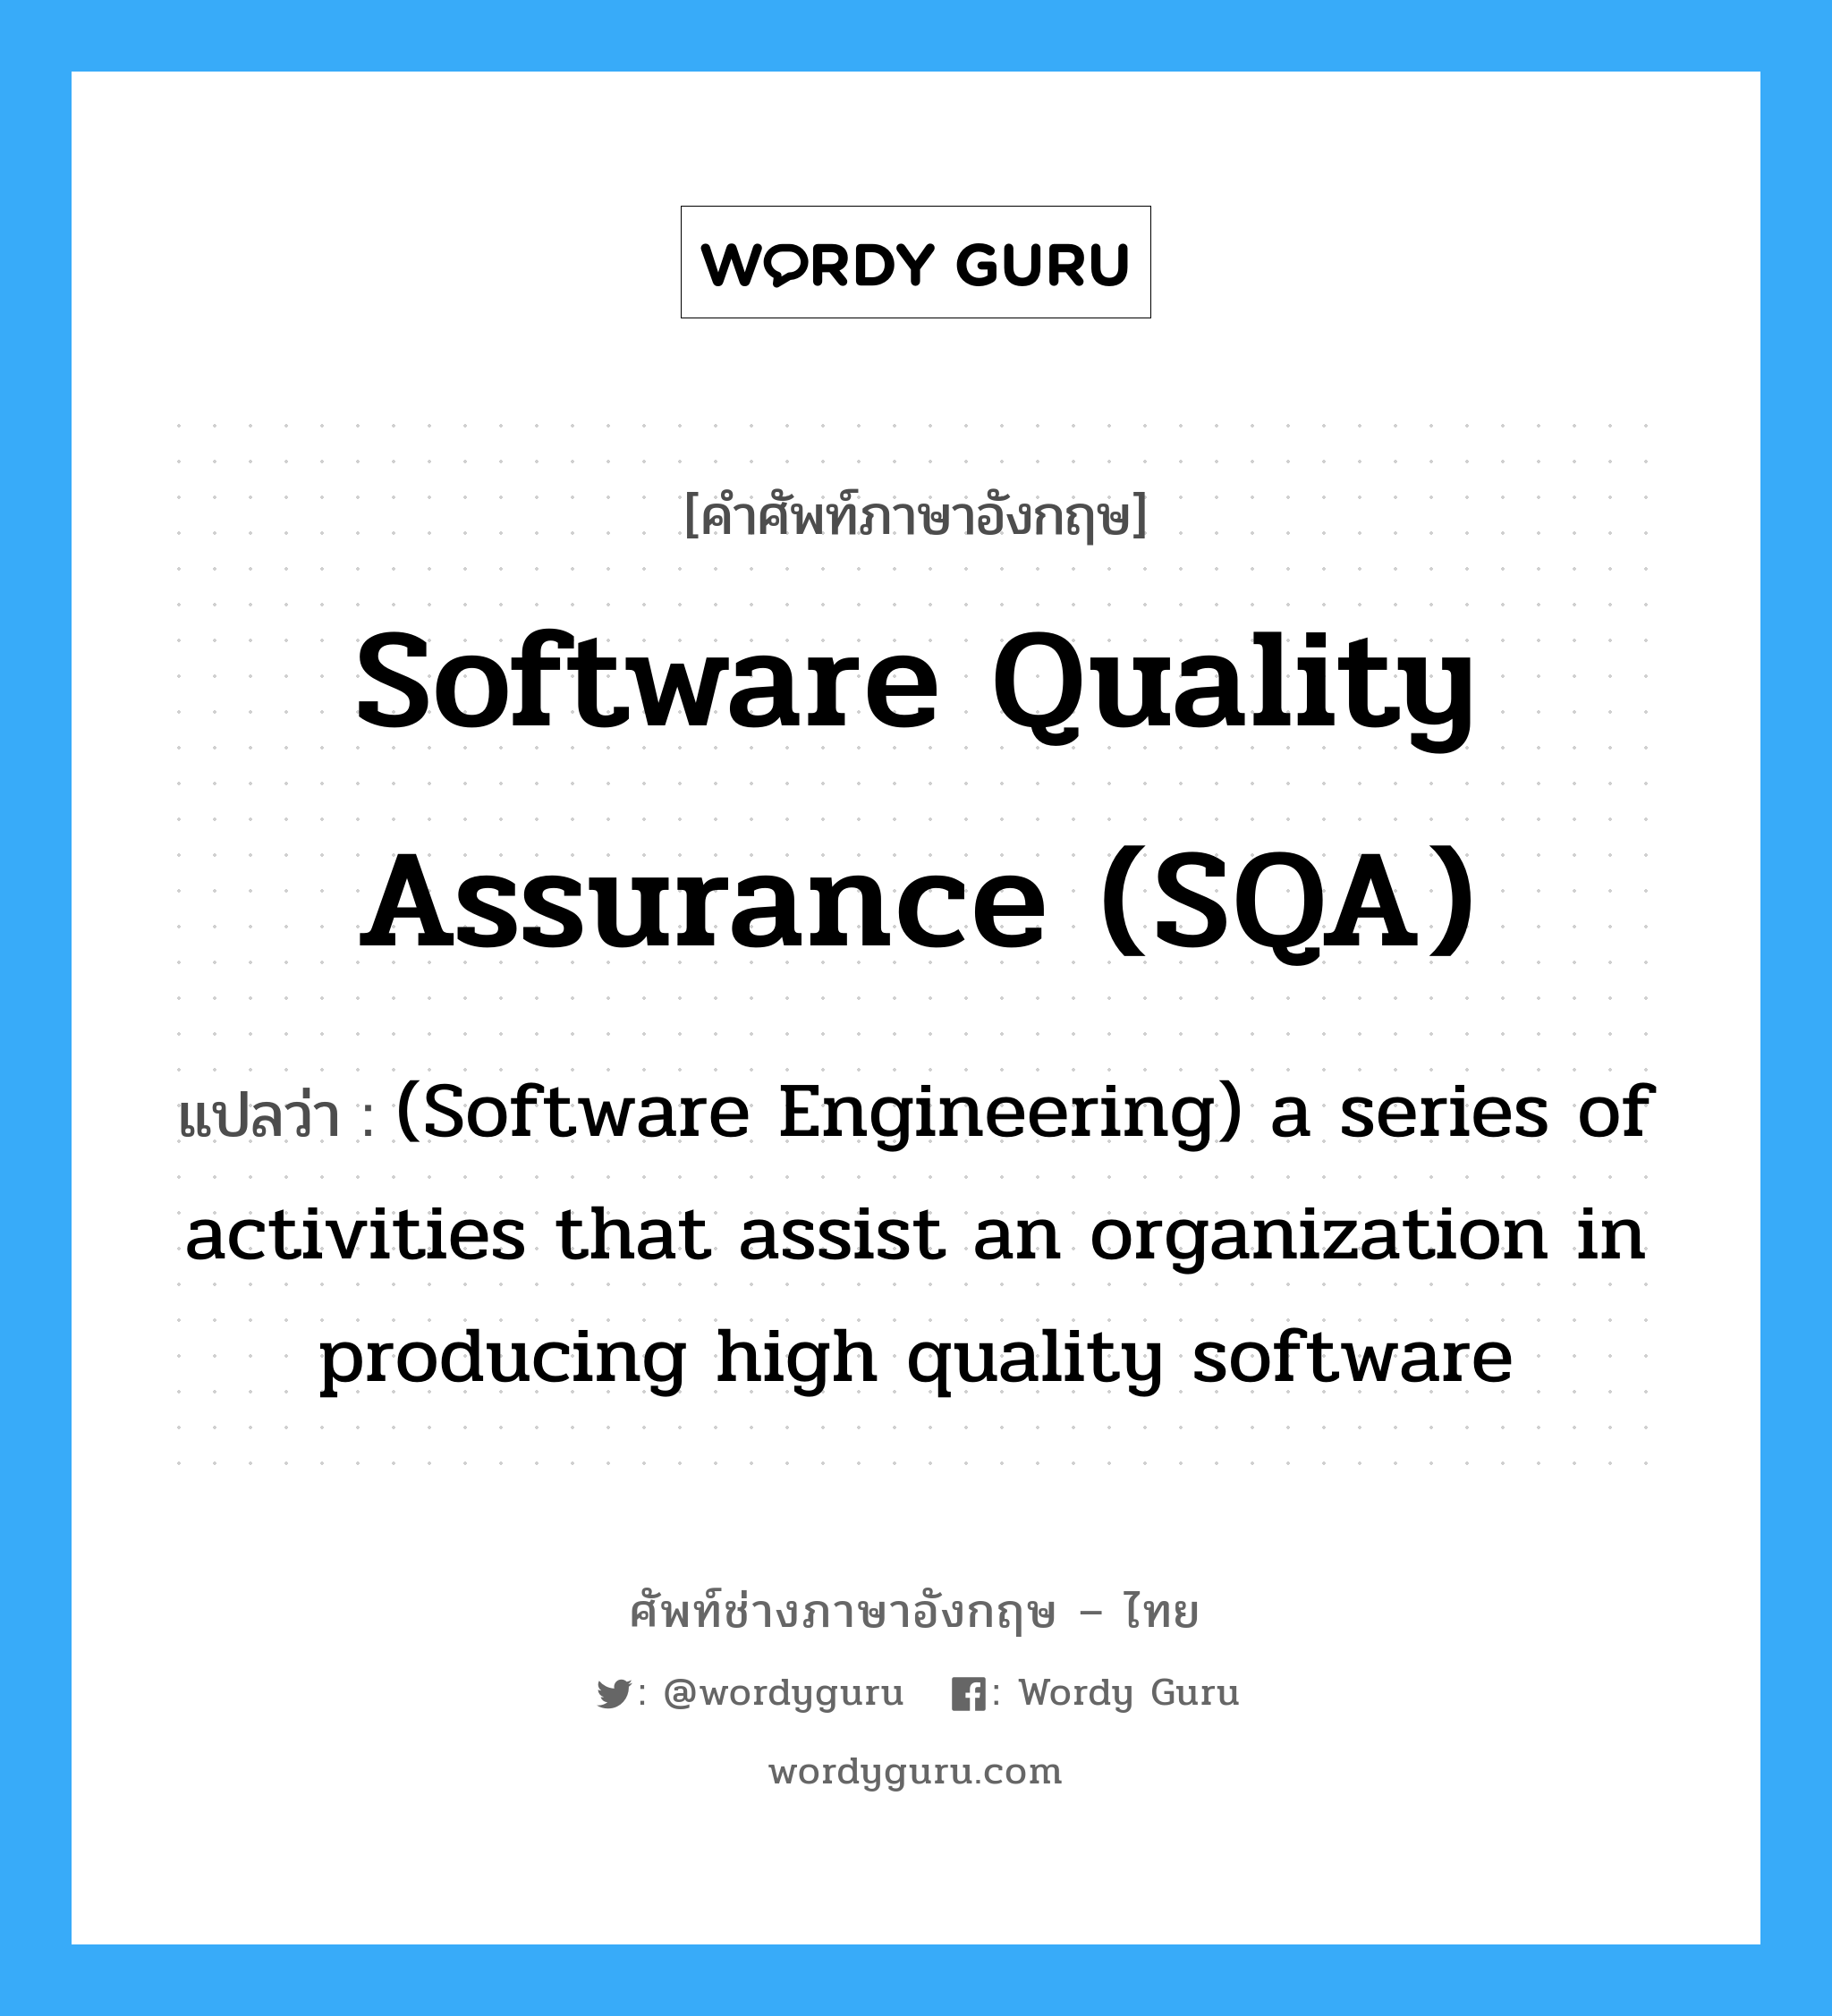 Software quality assurance (SQA) แปลว่า?, คำศัพท์ช่างภาษาอังกฤษ - ไทย Software quality assurance (SQA) คำศัพท์ภาษาอังกฤษ Software quality assurance (SQA) แปลว่า (Software Engineering) a series of activities that assist an organization in producing high quality software